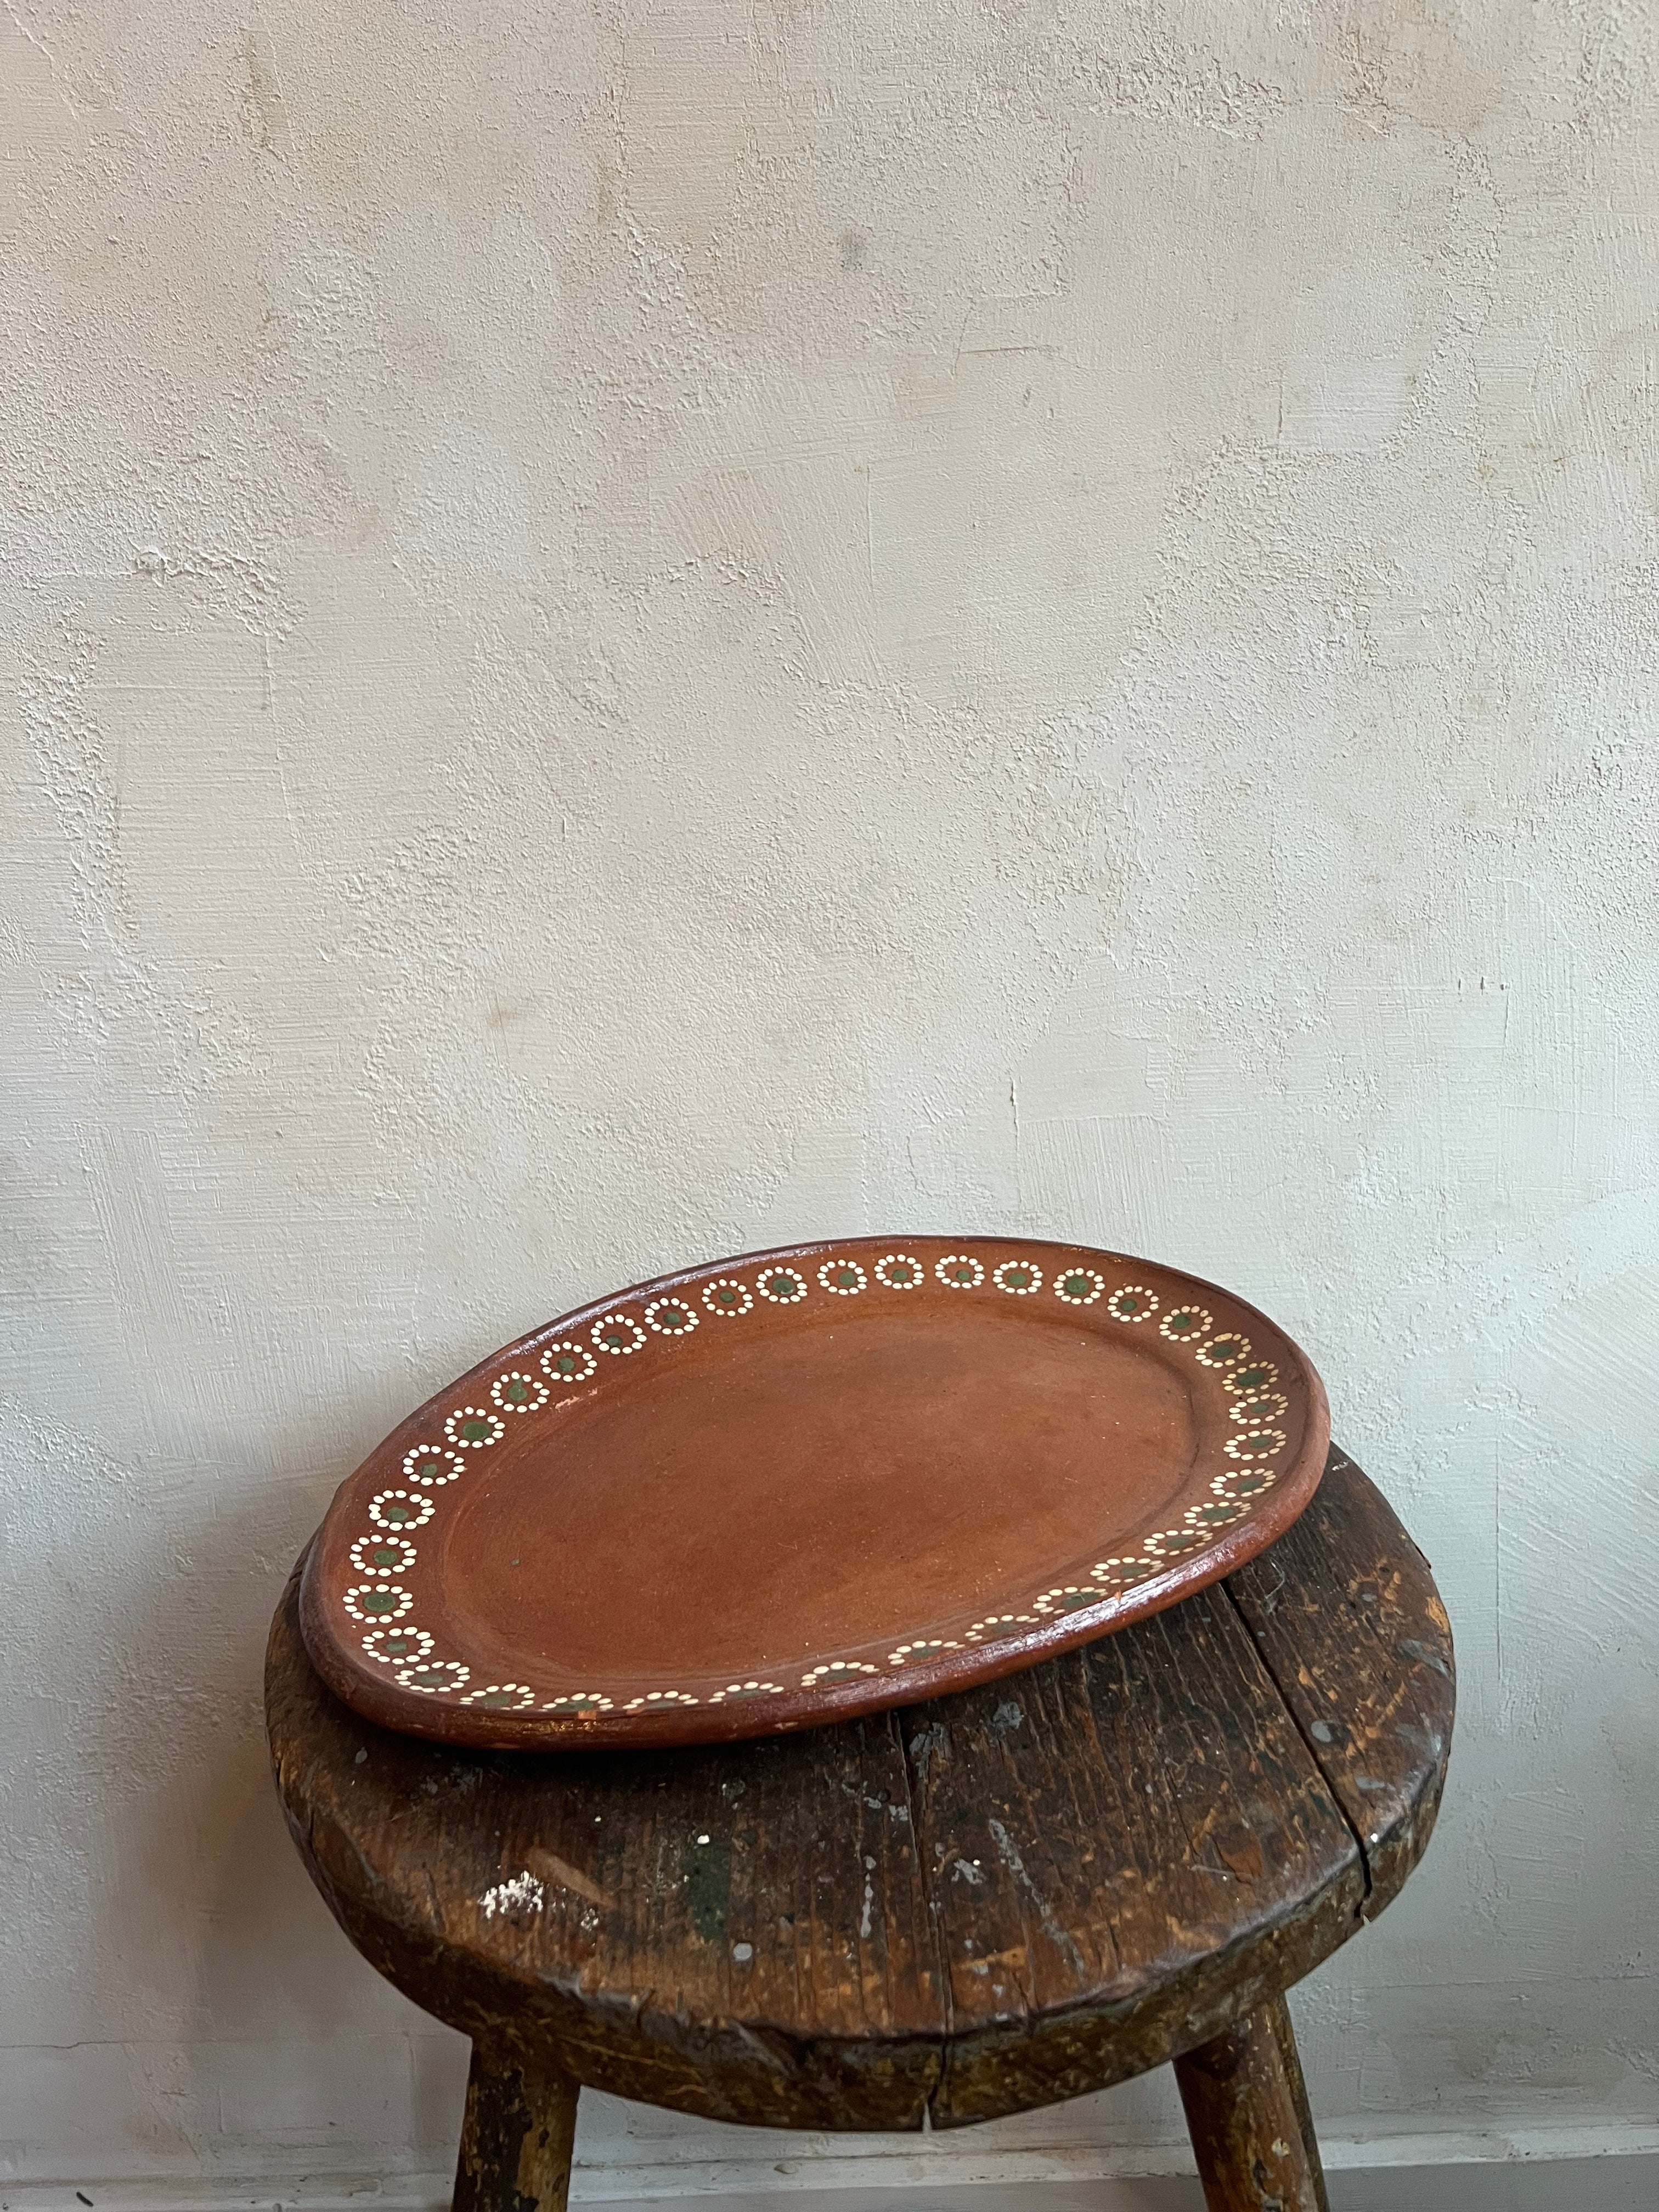 Red Clay Daisy Plate